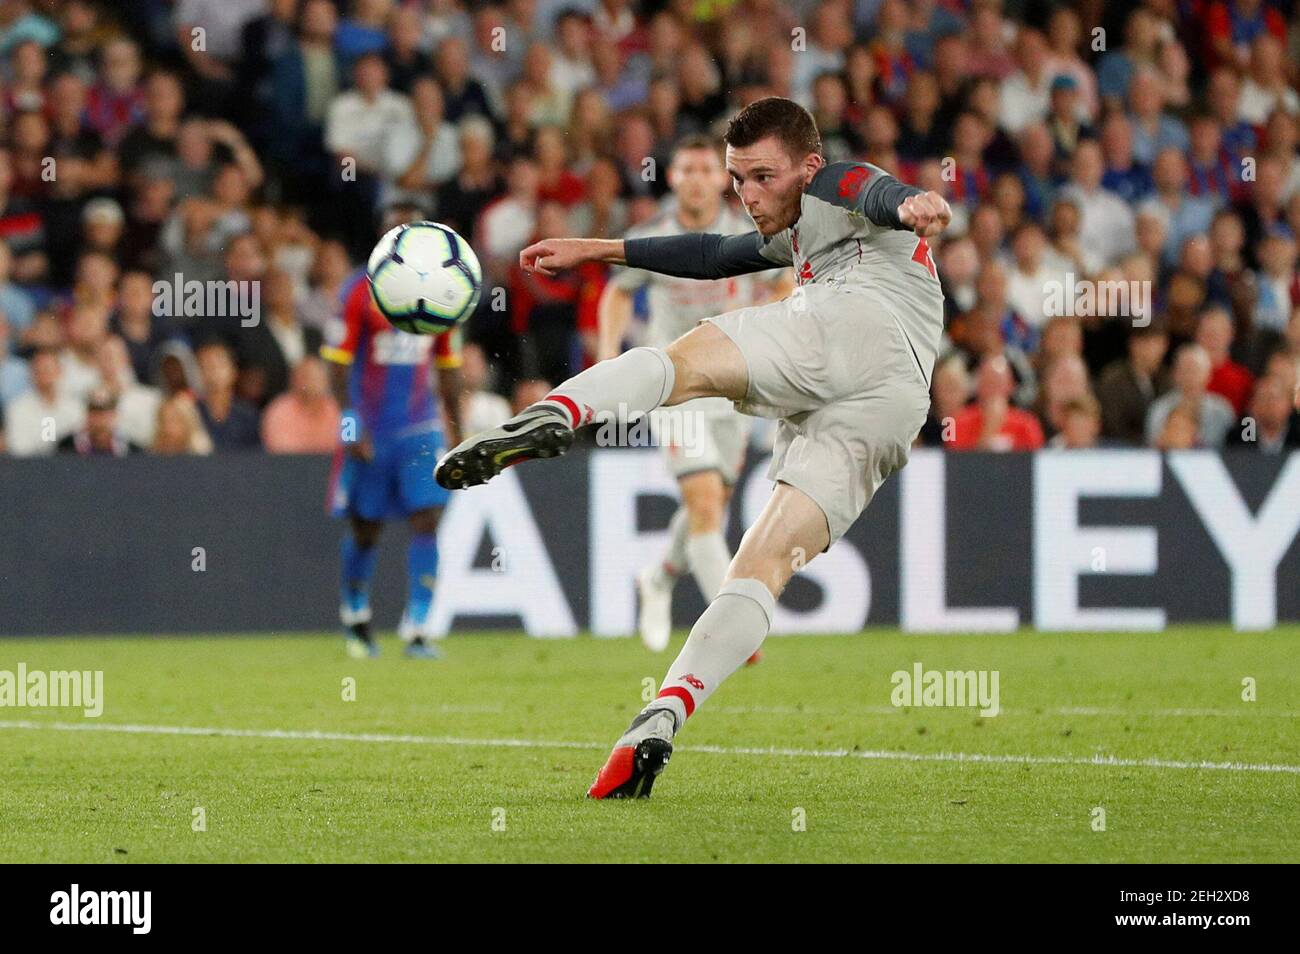 Soccer Football - Premier League - Crystal Palace v Liverpool - Selhurst Park, London, Britain - August 20, 2018  Liverpool's Andrew Robertson shoots at goal                 Action Images via Reuters/John Sibley  EDITORIAL USE ONLY. No use with unauthorized audio, video, data, fixture lists, club/league logos or 'live' services. Online in-match use limited to 75 images, no video emulation. No use in betting, games or single club/league/player publications.  Please contact your account representative for further details. Stock Photo